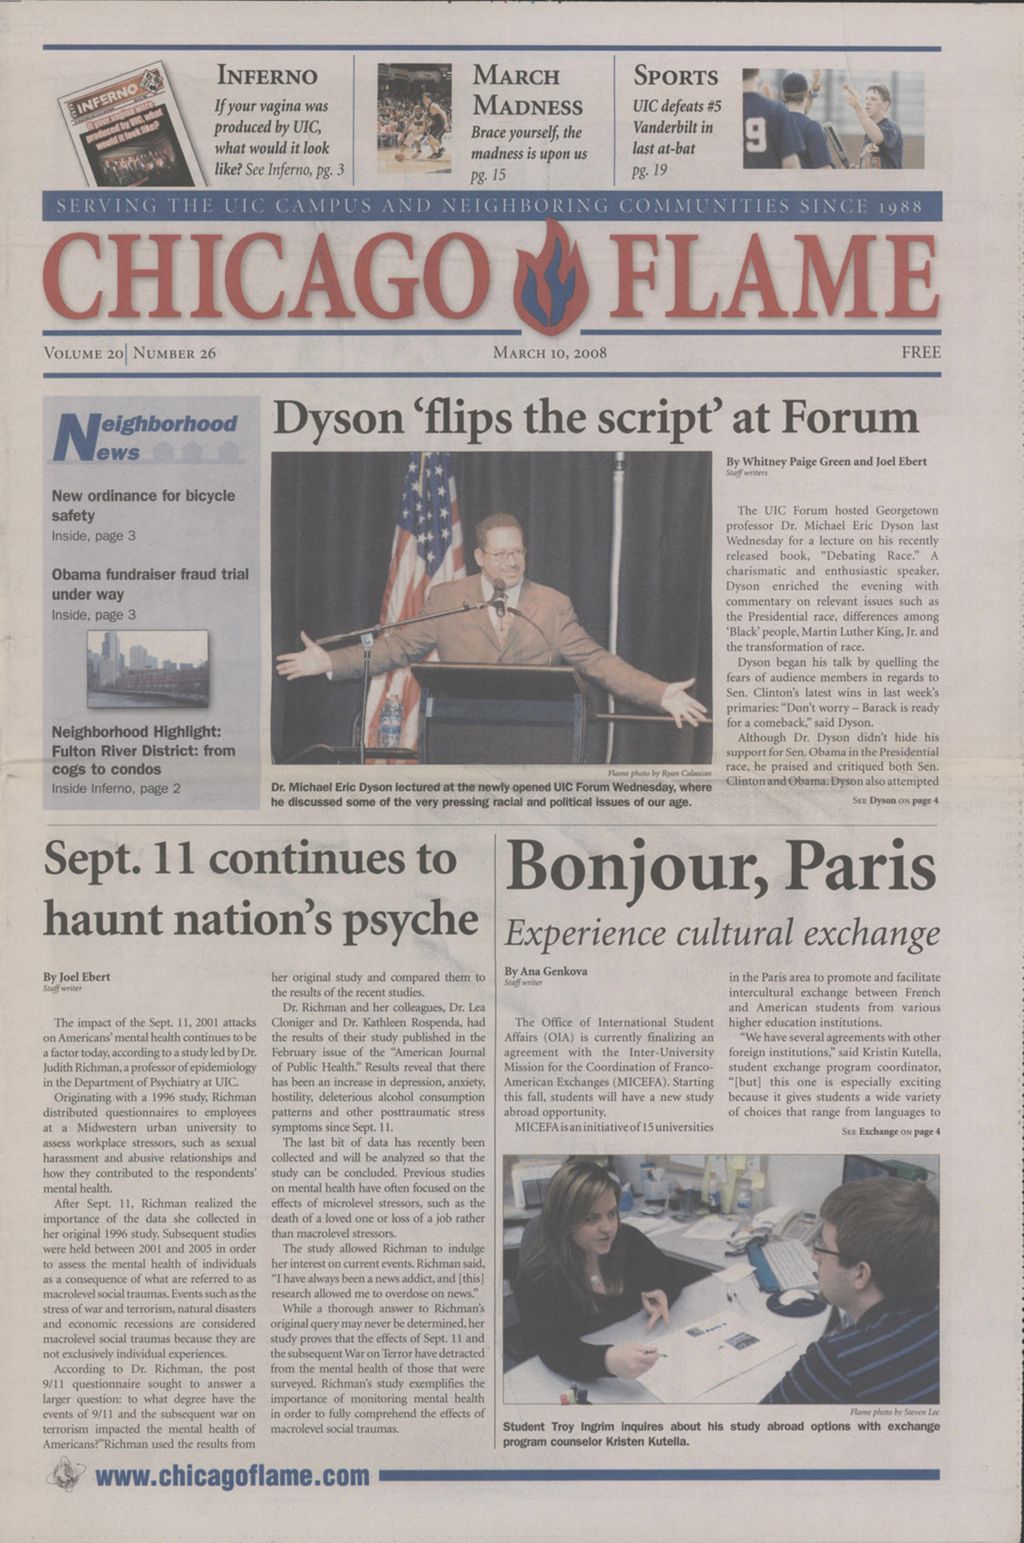 Chicago Flame (March 10, 2008)